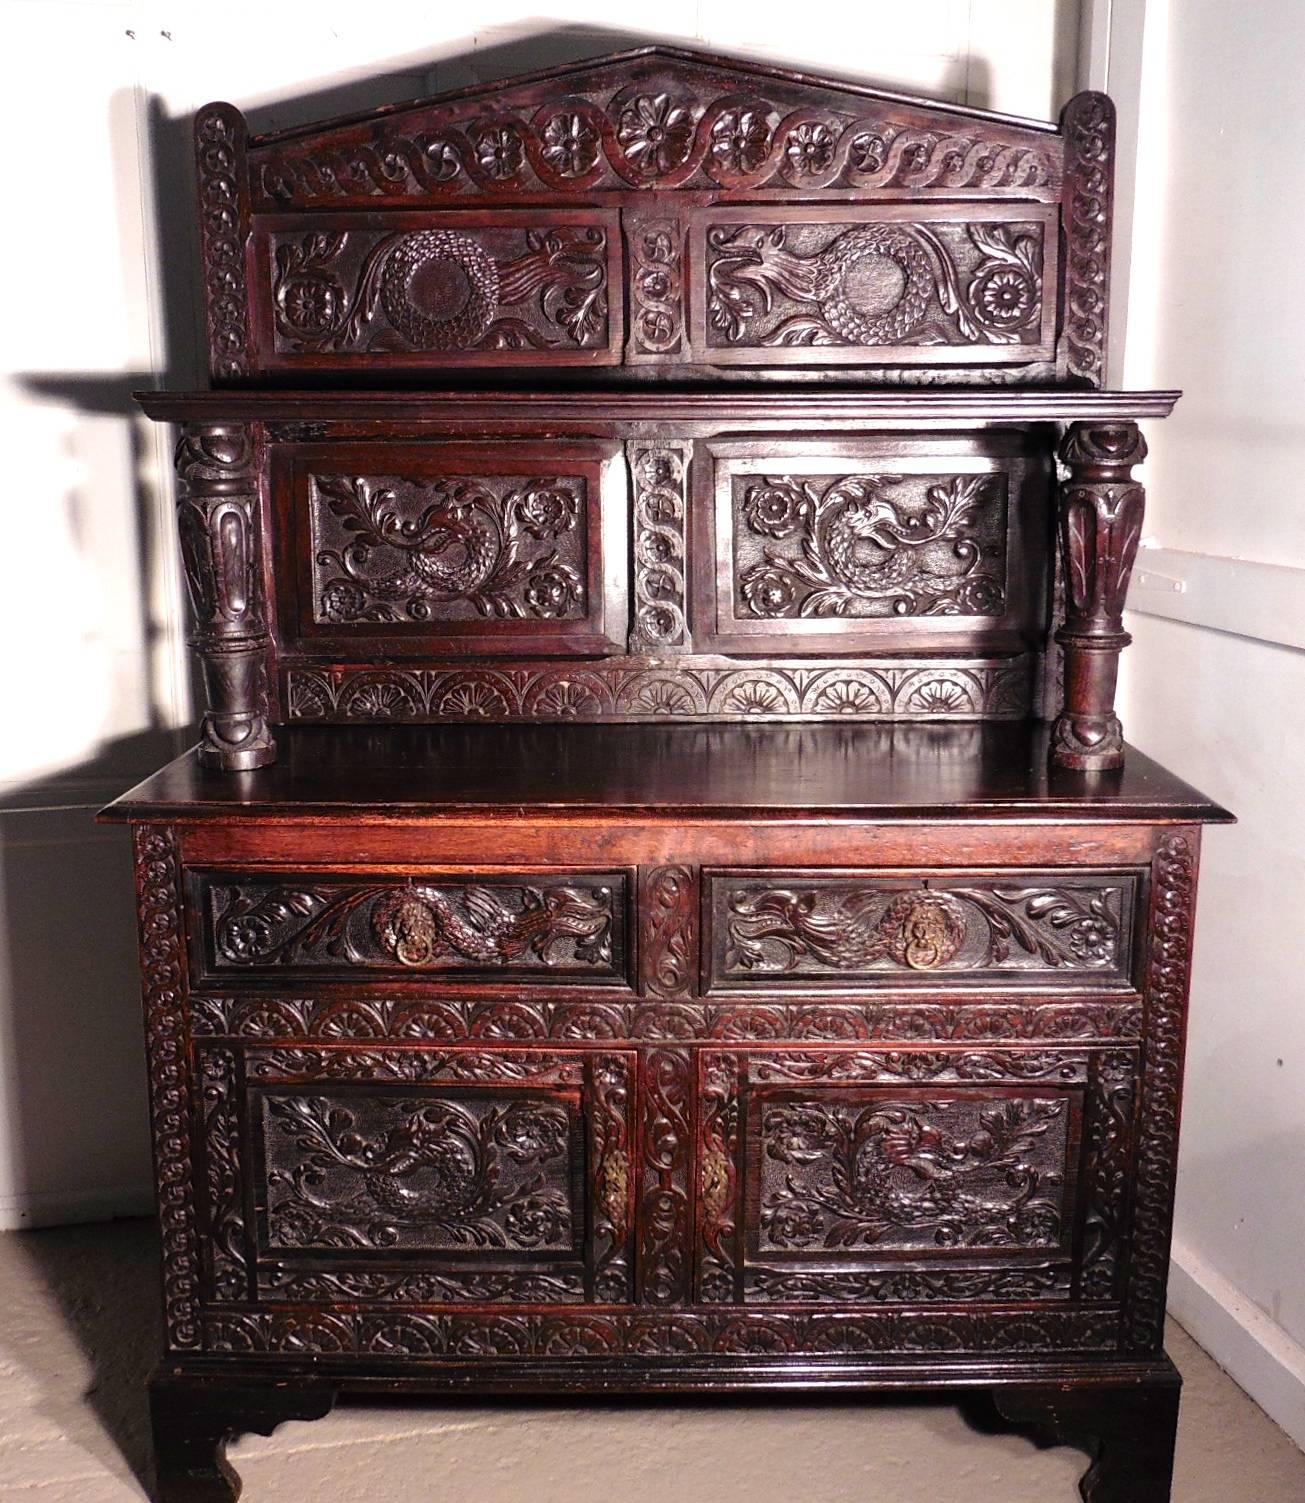 19th century carved welsh oak sideboard, dresser or hall cupboard 

This is a handsome piece with a wonderful patina, the carving is of very fine quality, the gargoyles carved on every panel, depict Dragons and fierce serpents
The dresser has a